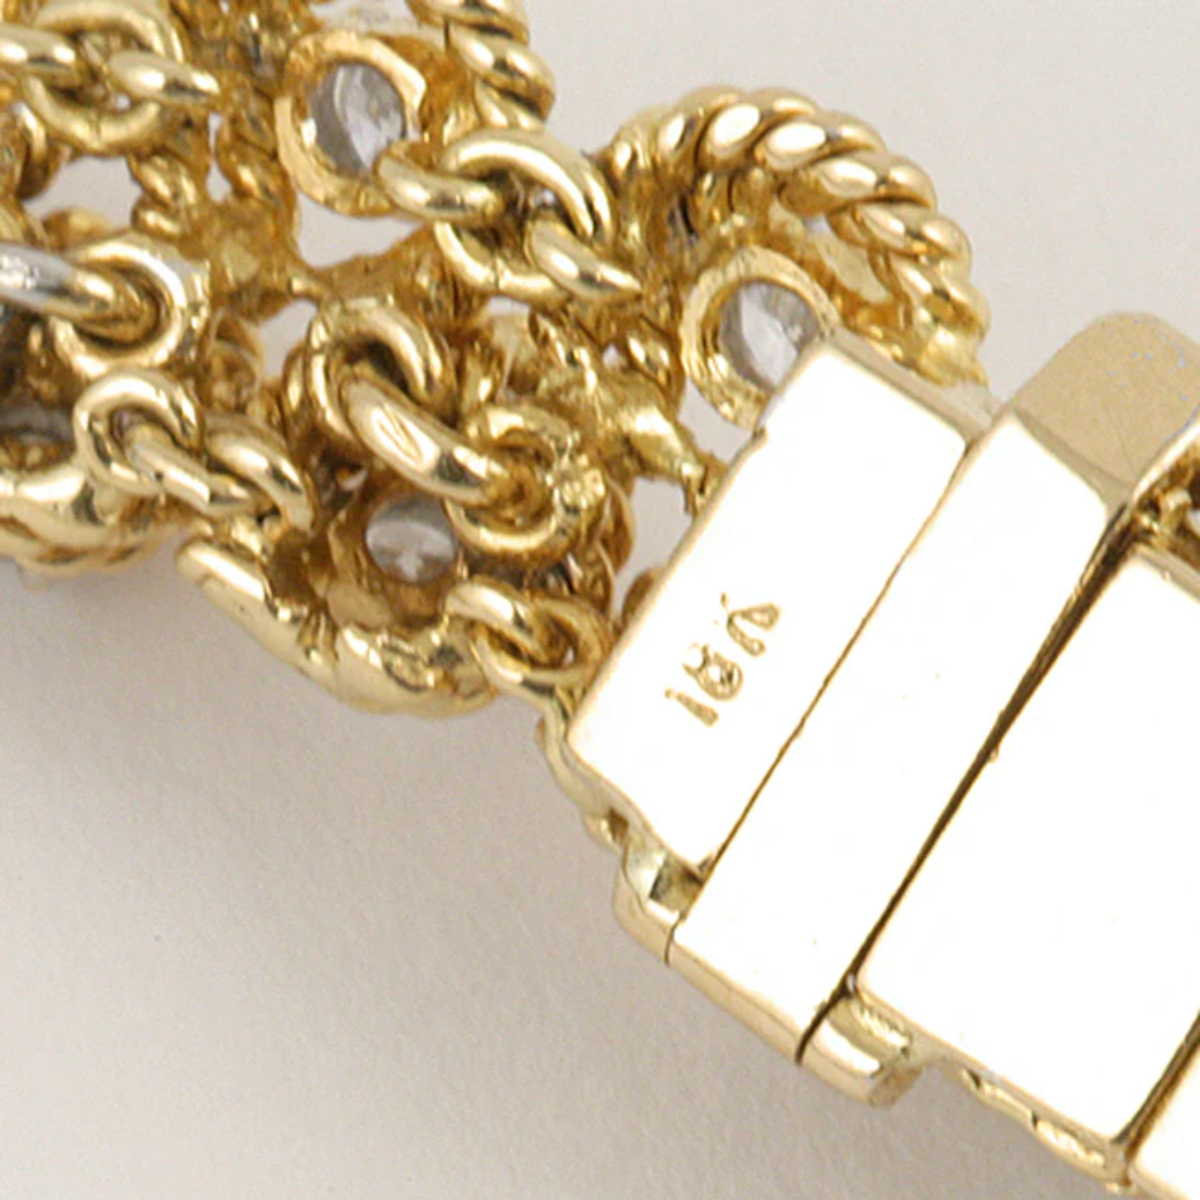 Circa 1950s 18KT Yellow Gold Diamond Rope Collar Necklace close-up of clasp